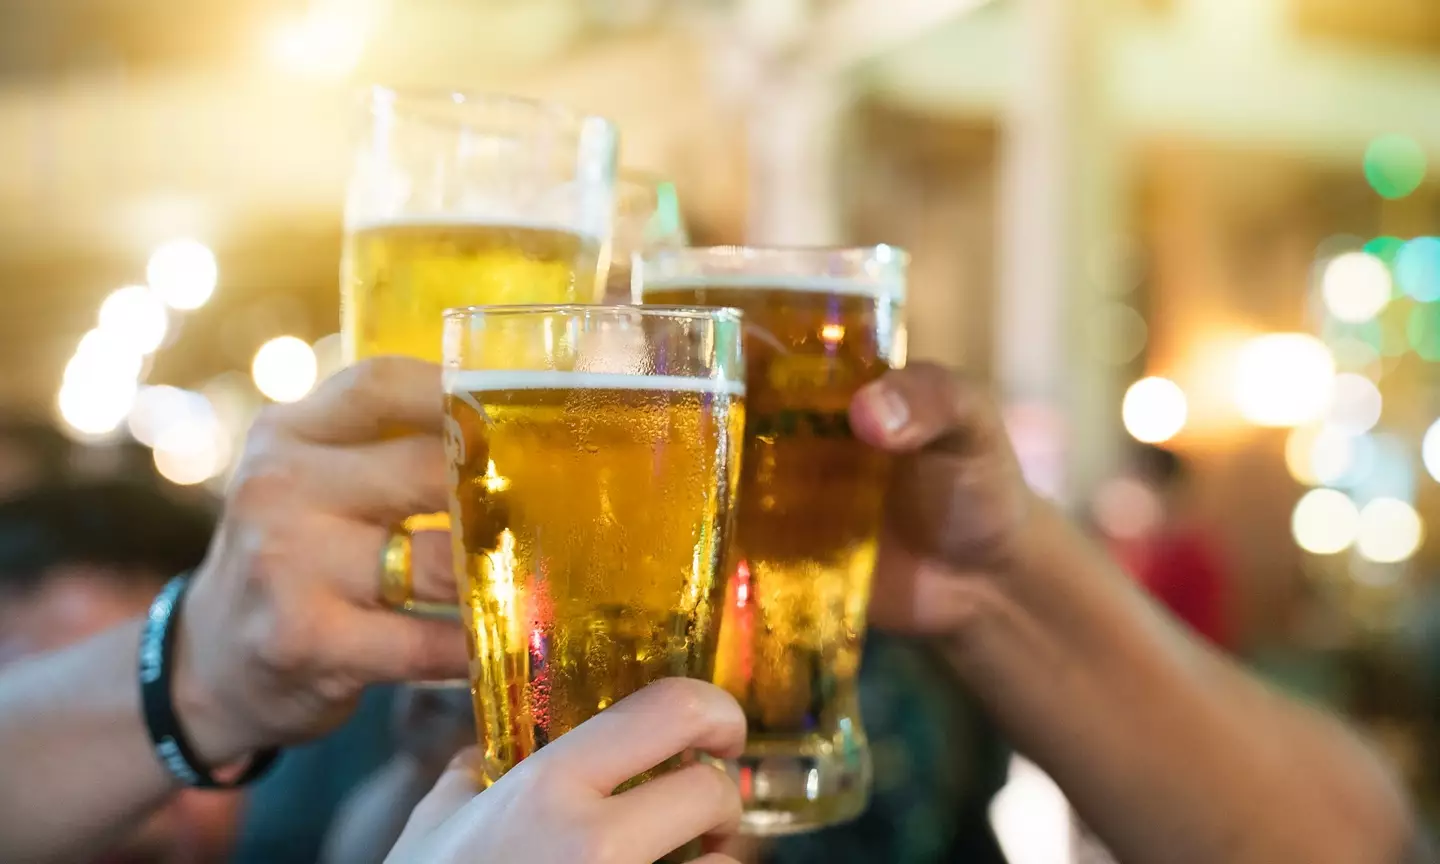 Getting defensive about your drinking habits is a potential sign.